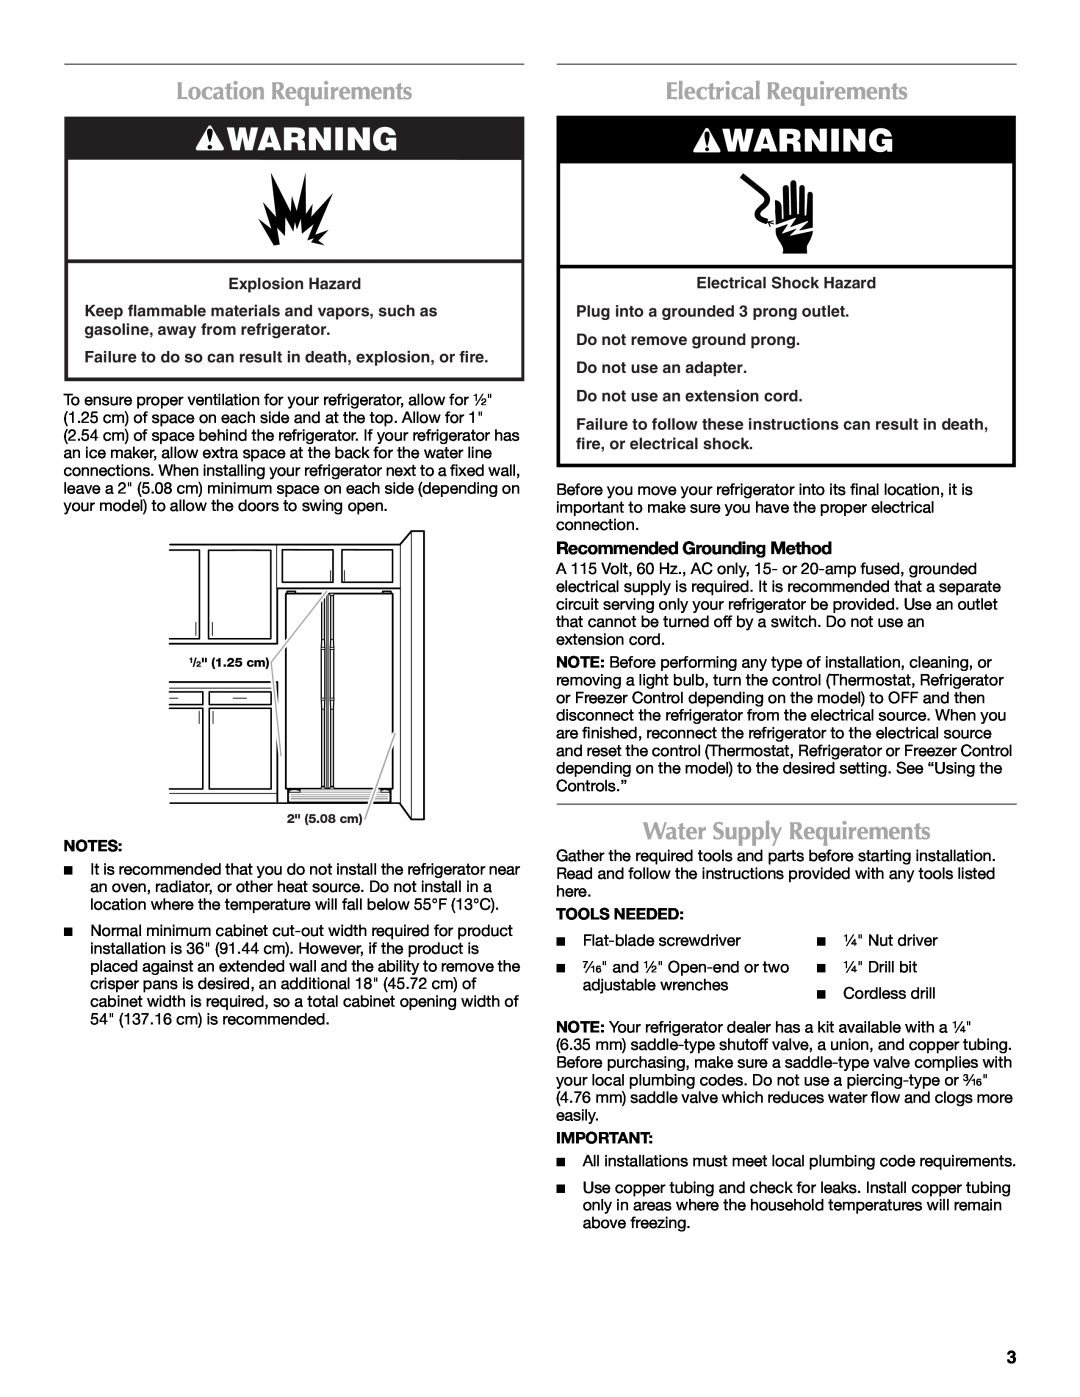 Maytag W10321478A Location Requirements, Electrical Requirements, Water Supply Requirements, Recommended Grounding Method 